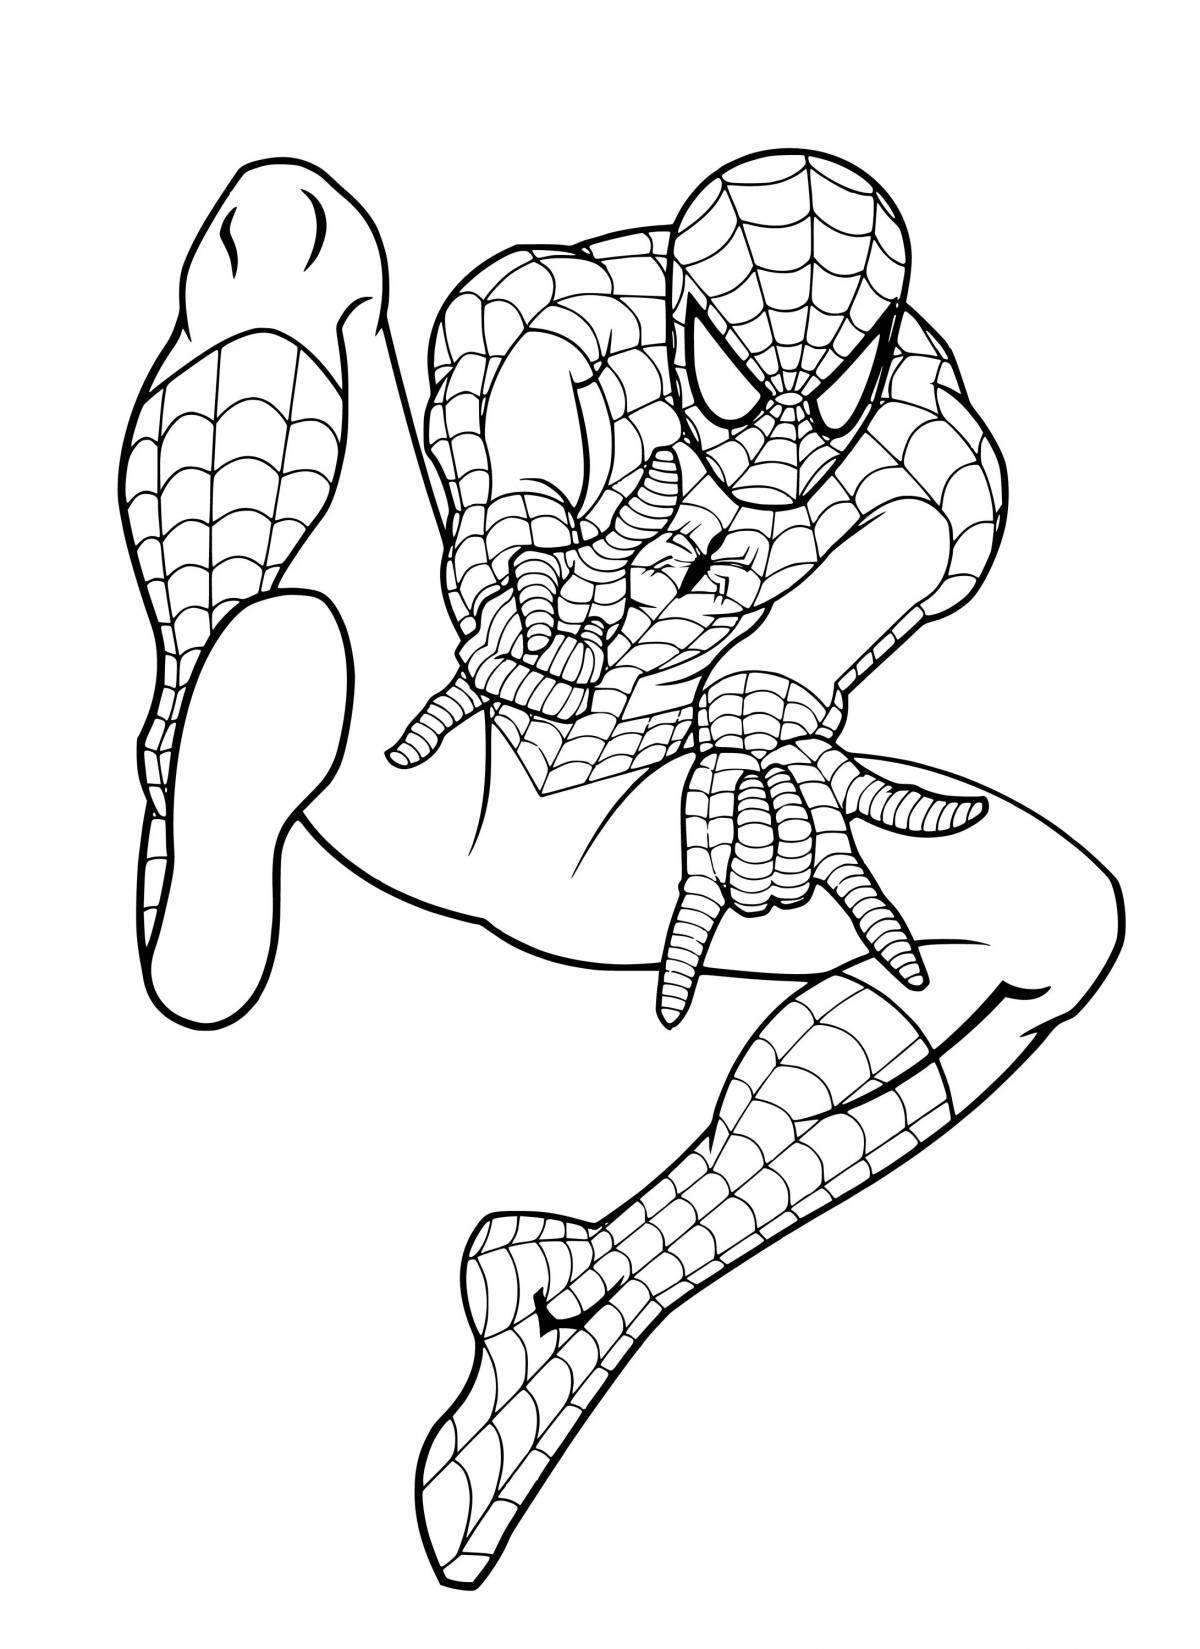 Coloring the amazing spiderman